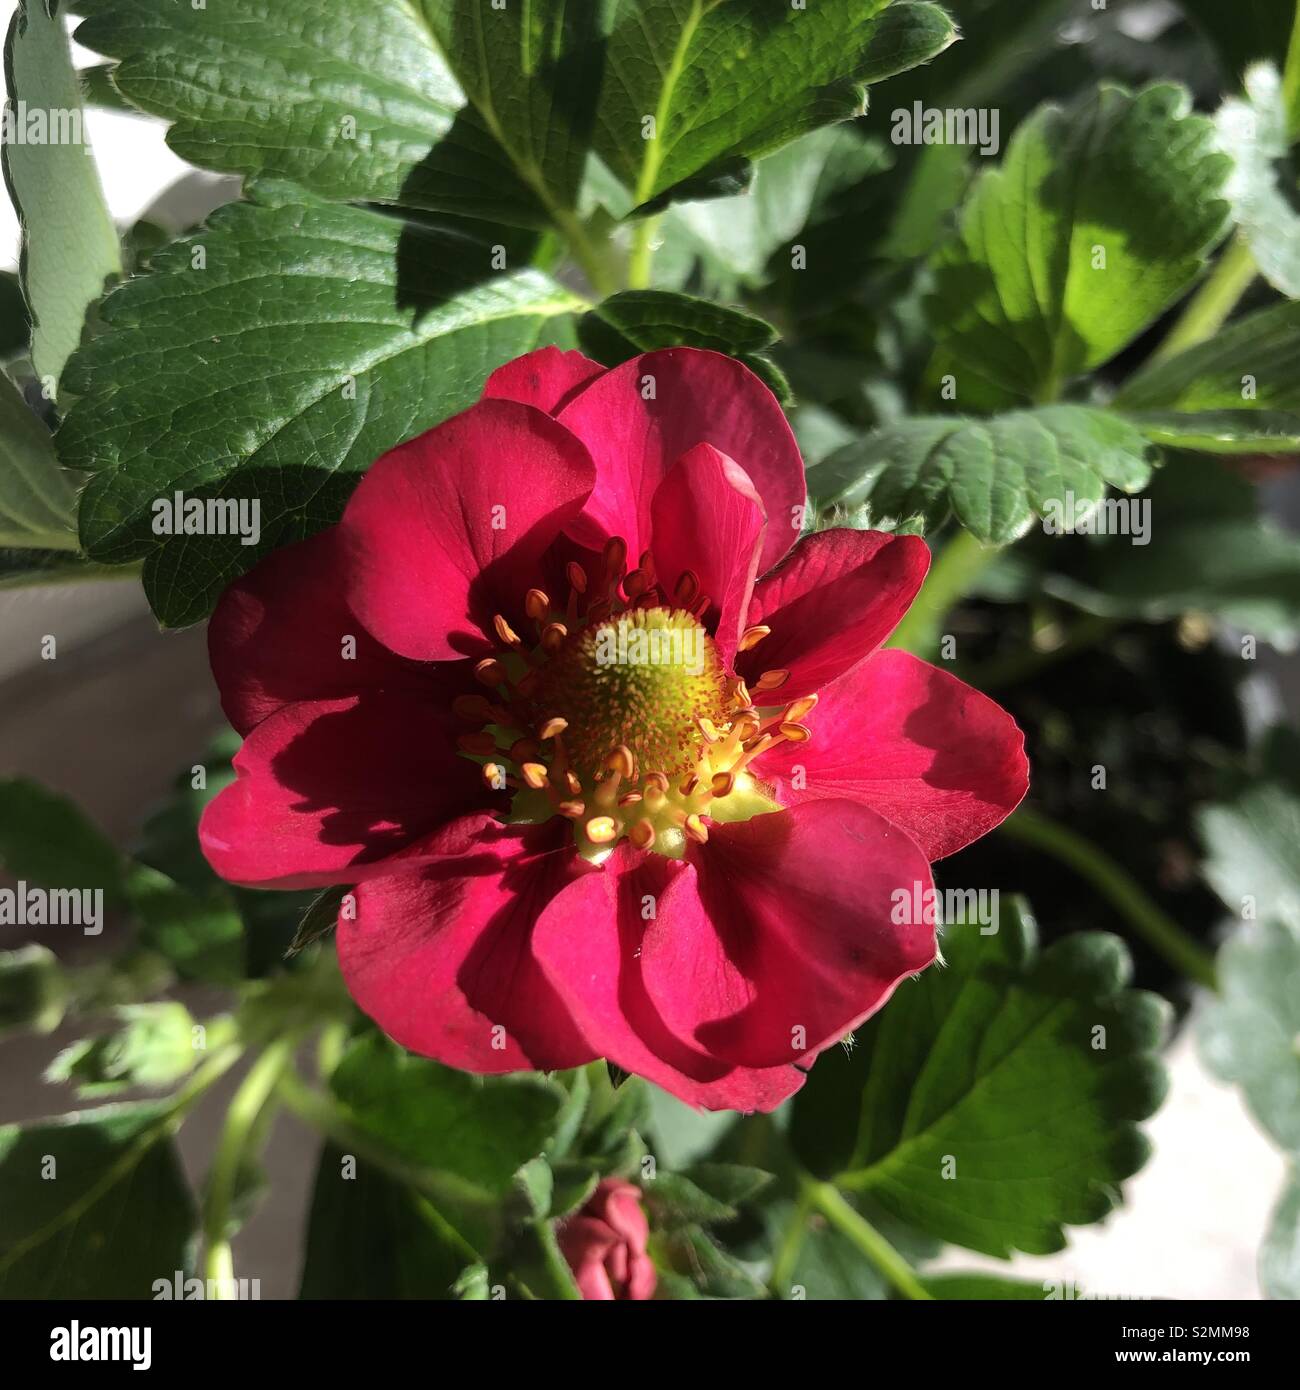 In the market you can find strawberry plants with pink flowers.  Very beautiful and decorative until the flowers become tasty fruits. Stock Photo